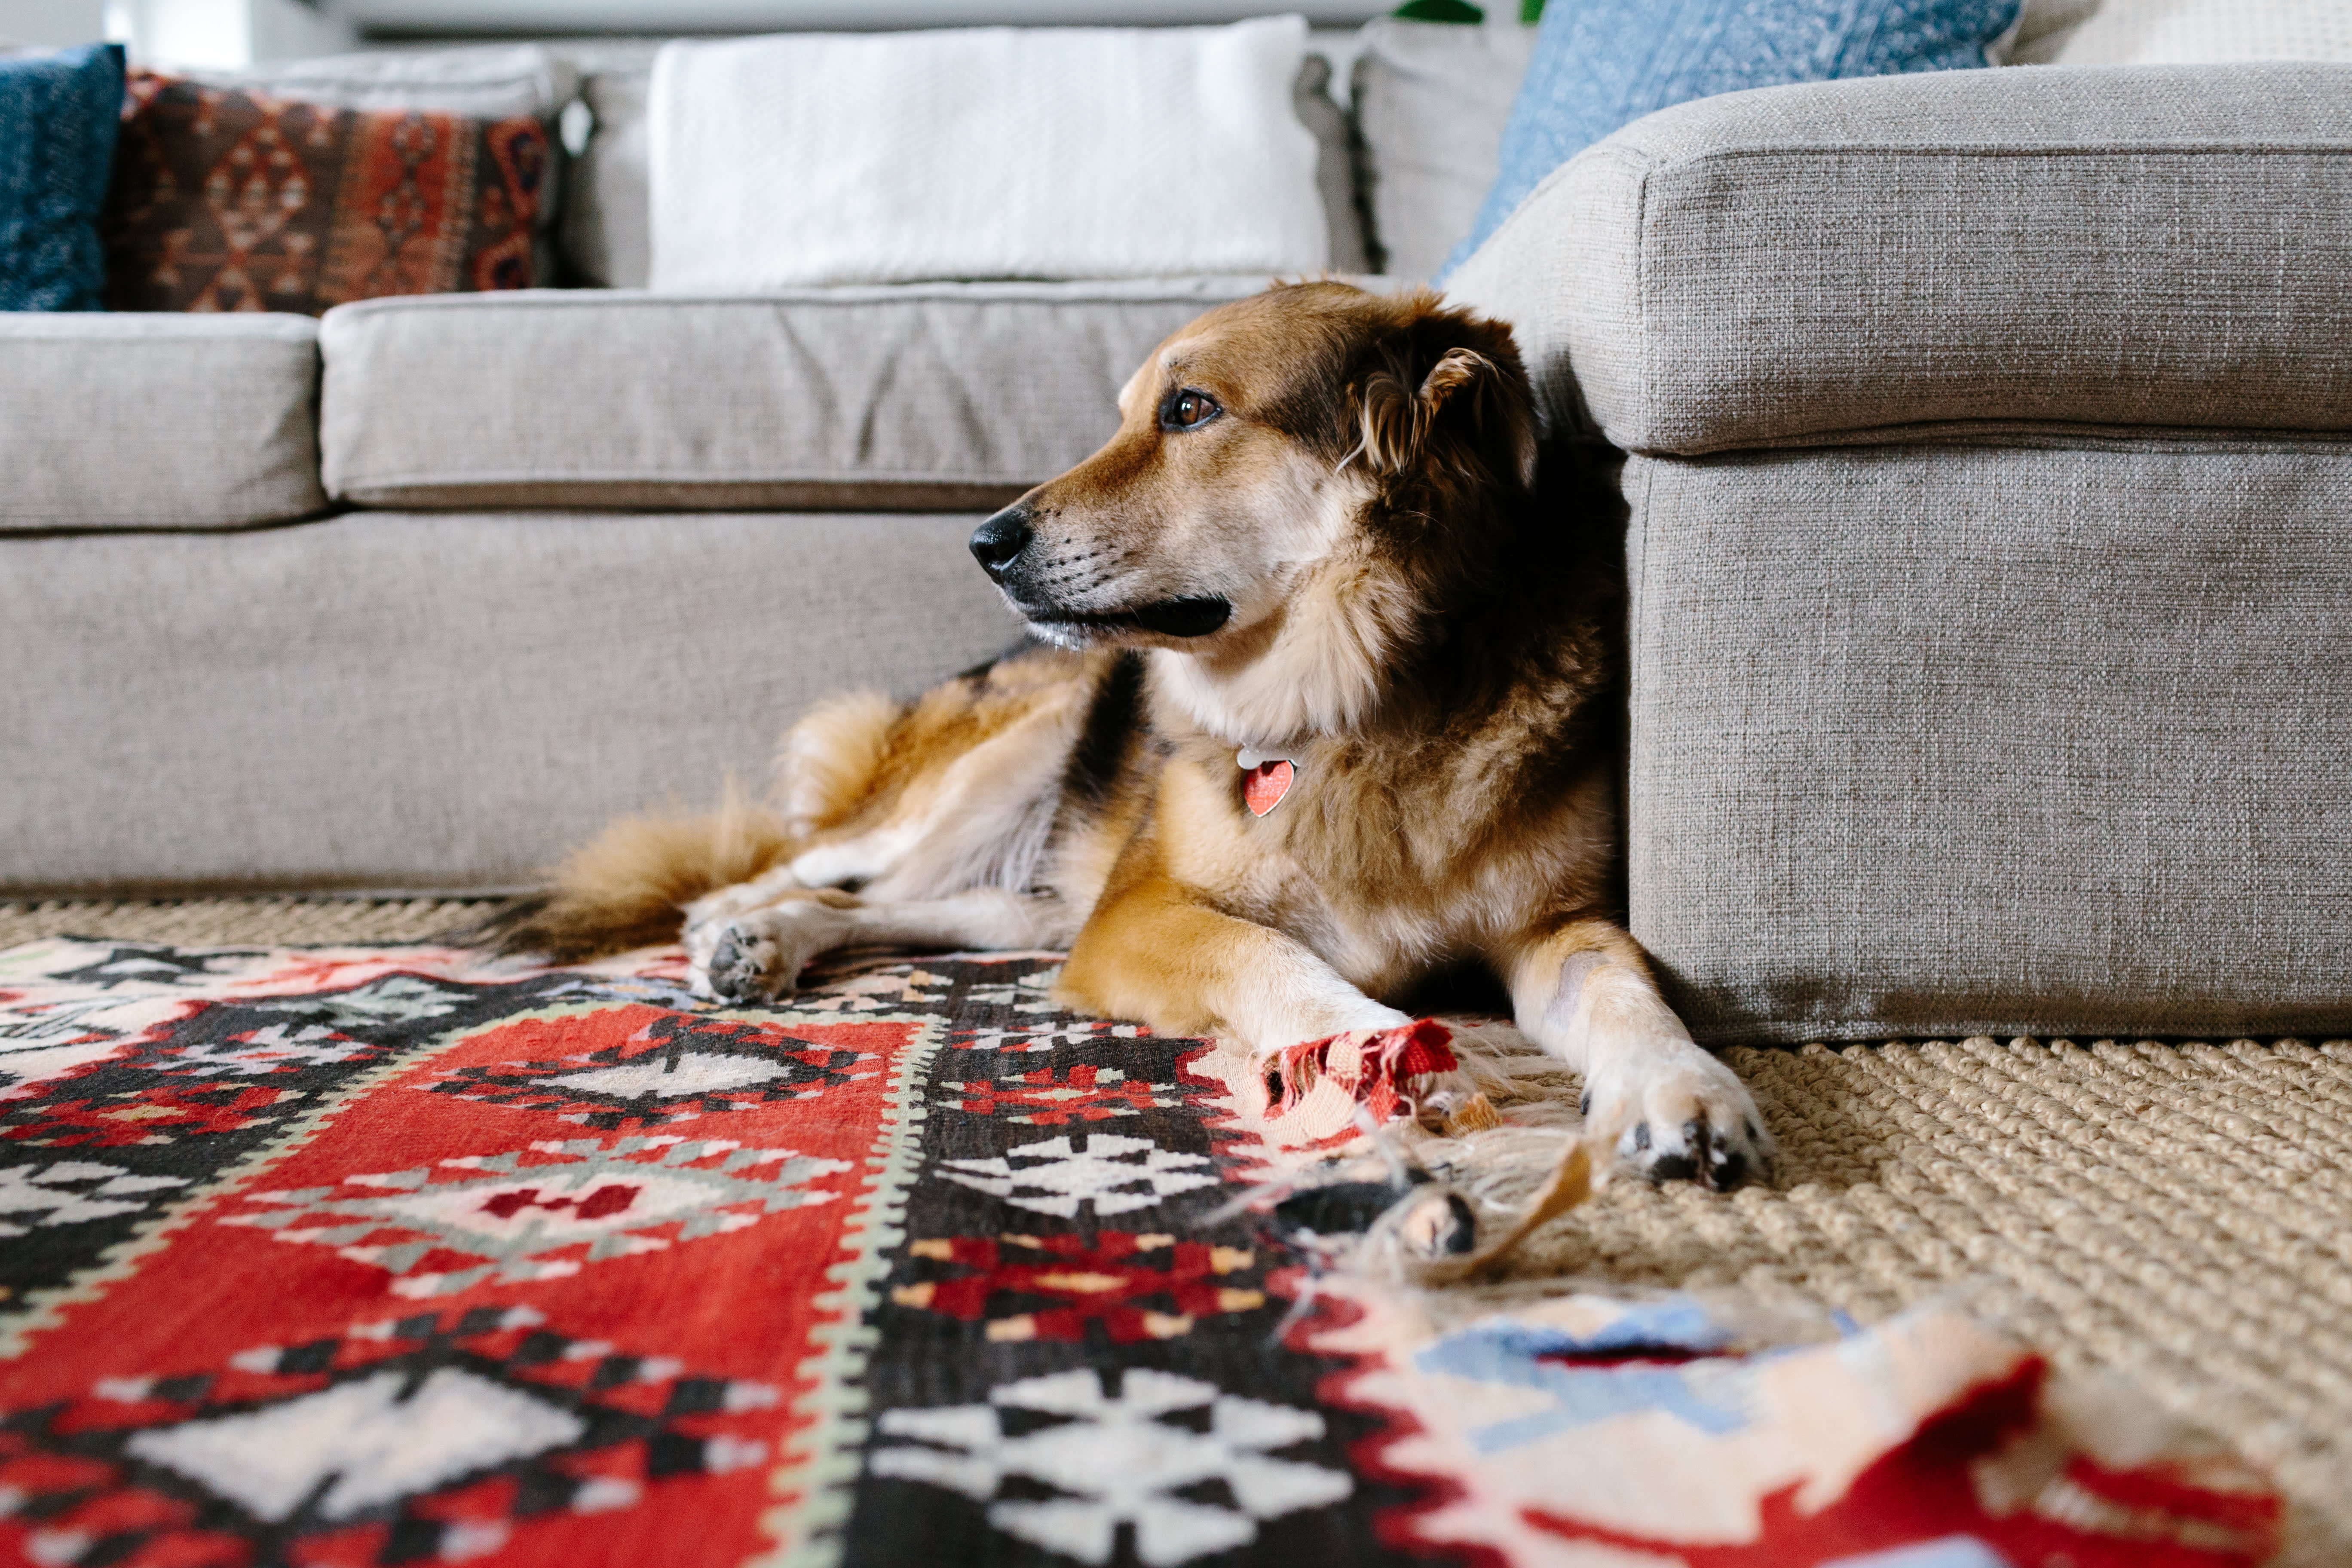 Best Rugs for Dog Owners - Must Read Before Buying! – Woof Whiskers